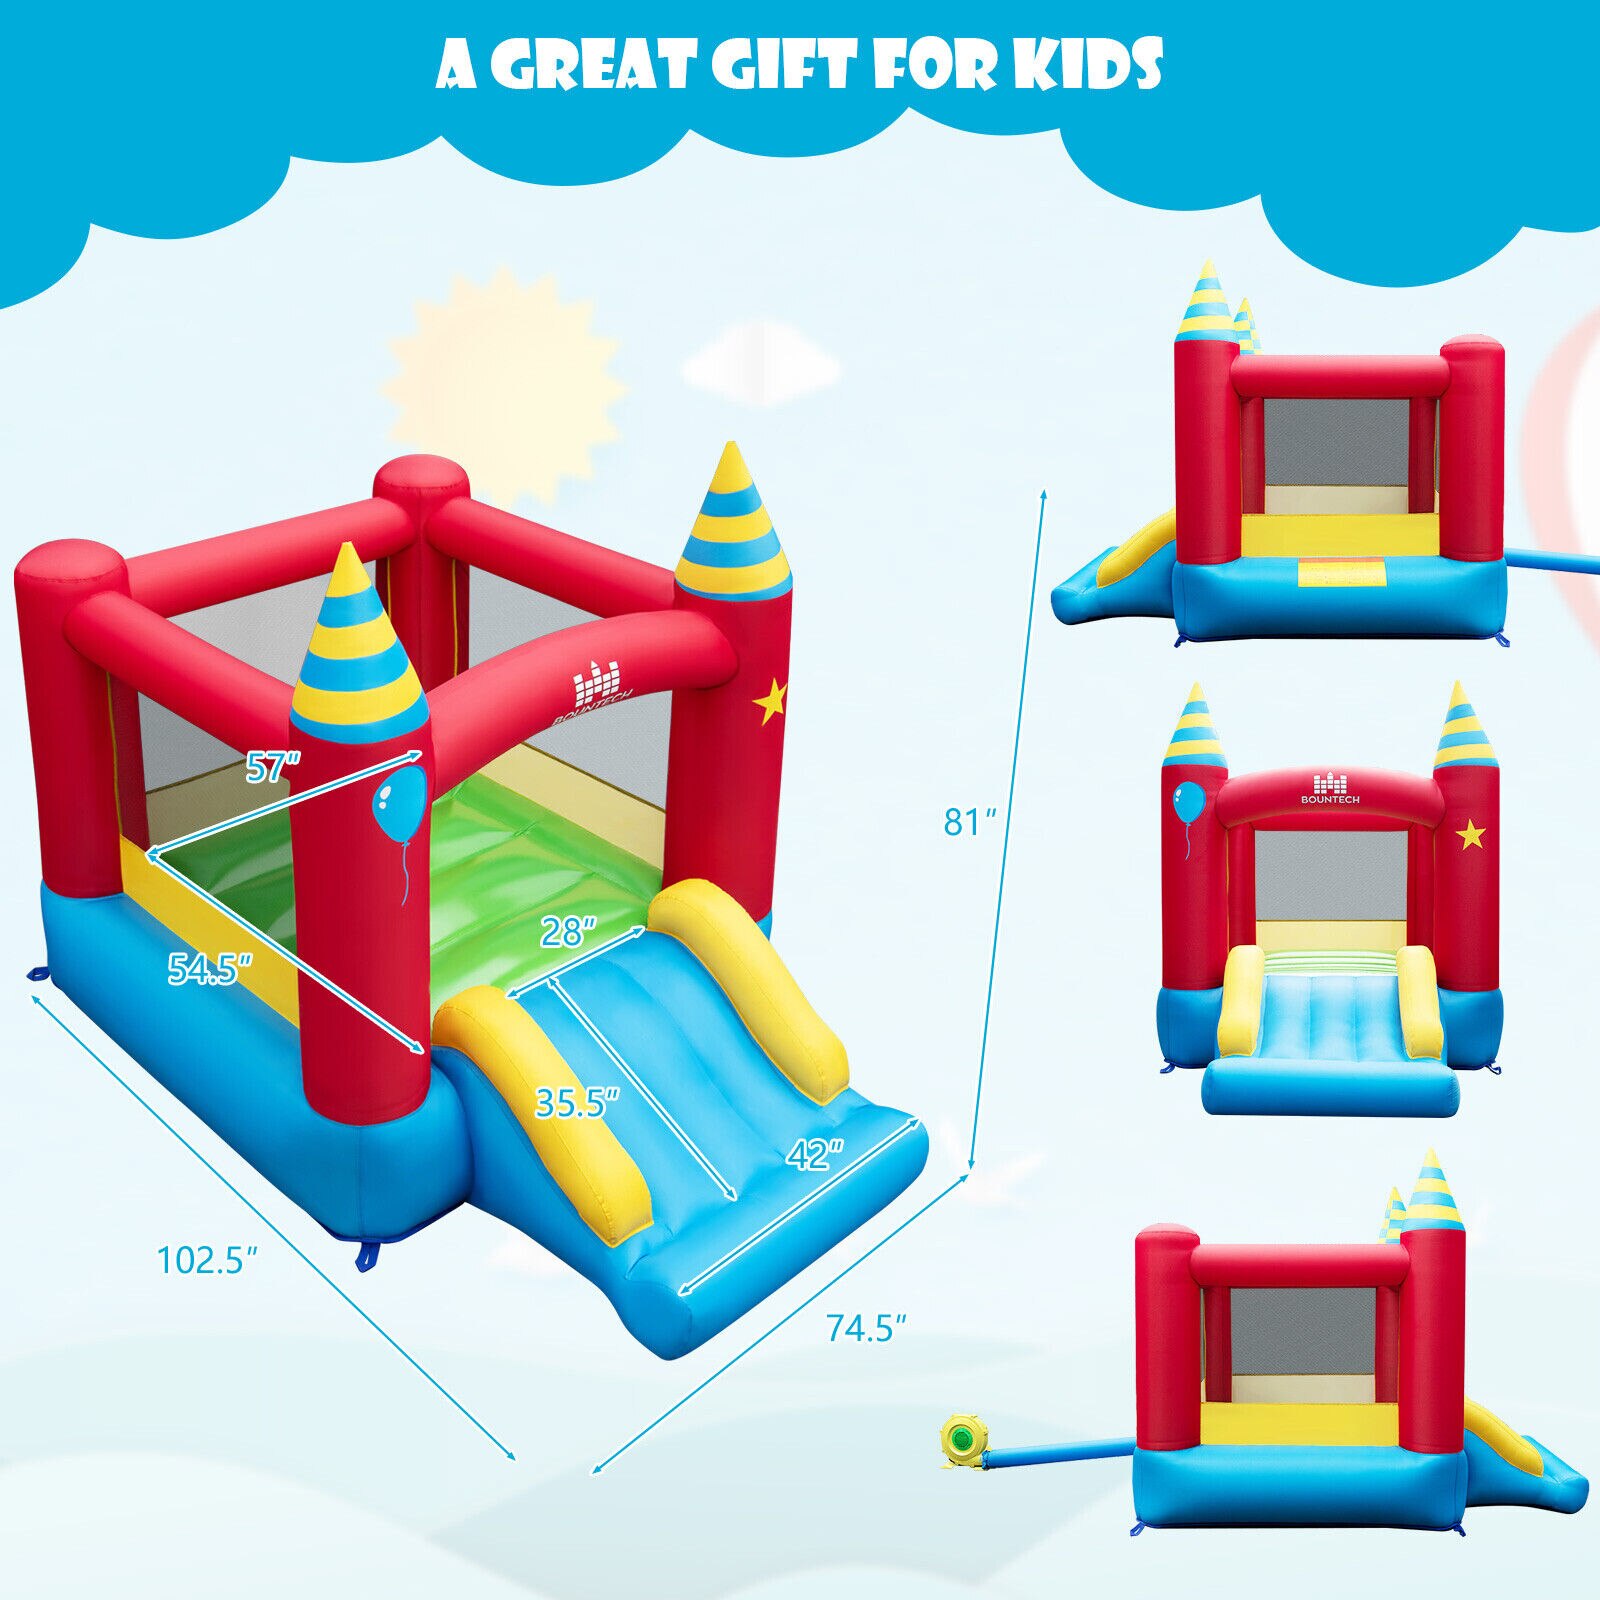 Costway-Inflatable-Bounce-Castle-Kids-Jumping-Bouncer-Indoor-Outdoor-Blower-Excluded-1